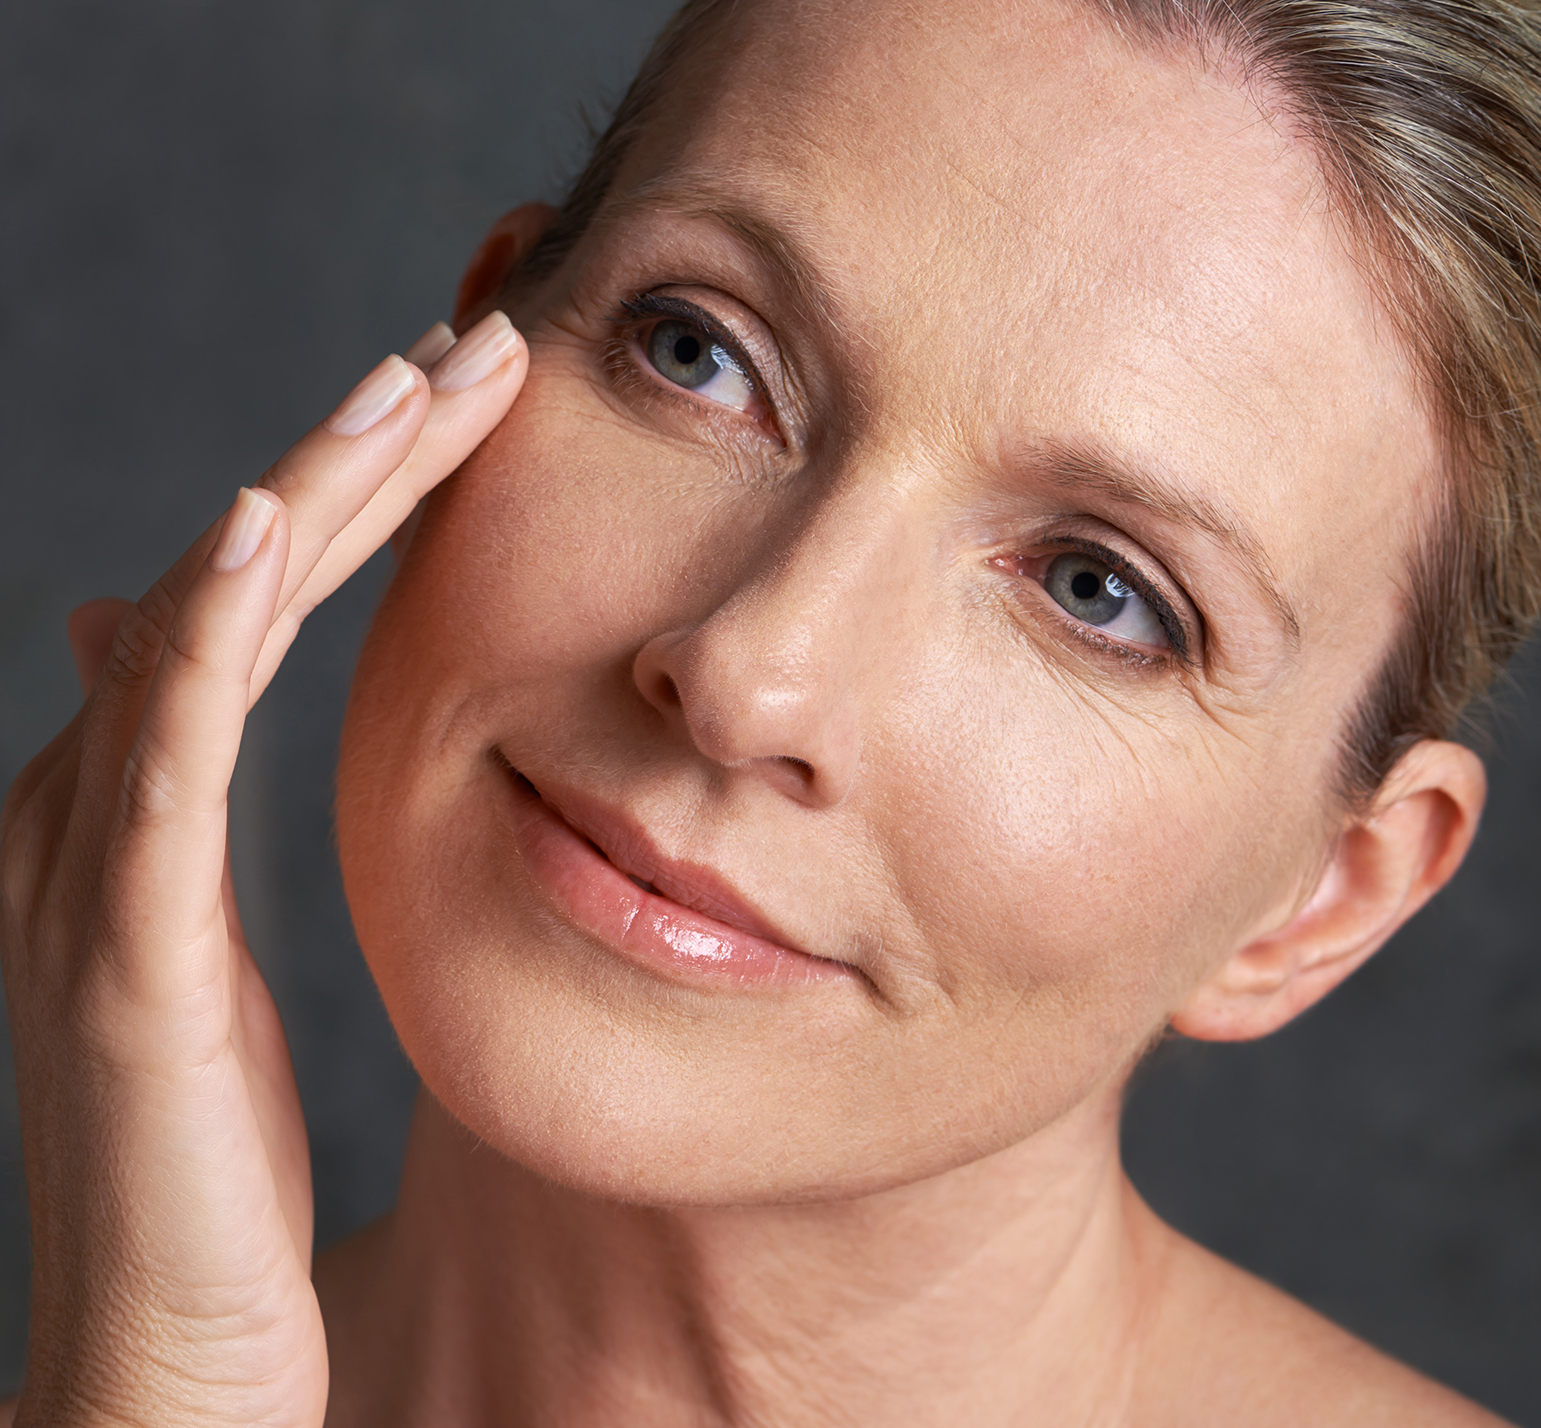 The Vila Institute for Plastic Surgery Blog | What is the right age for a facelift?